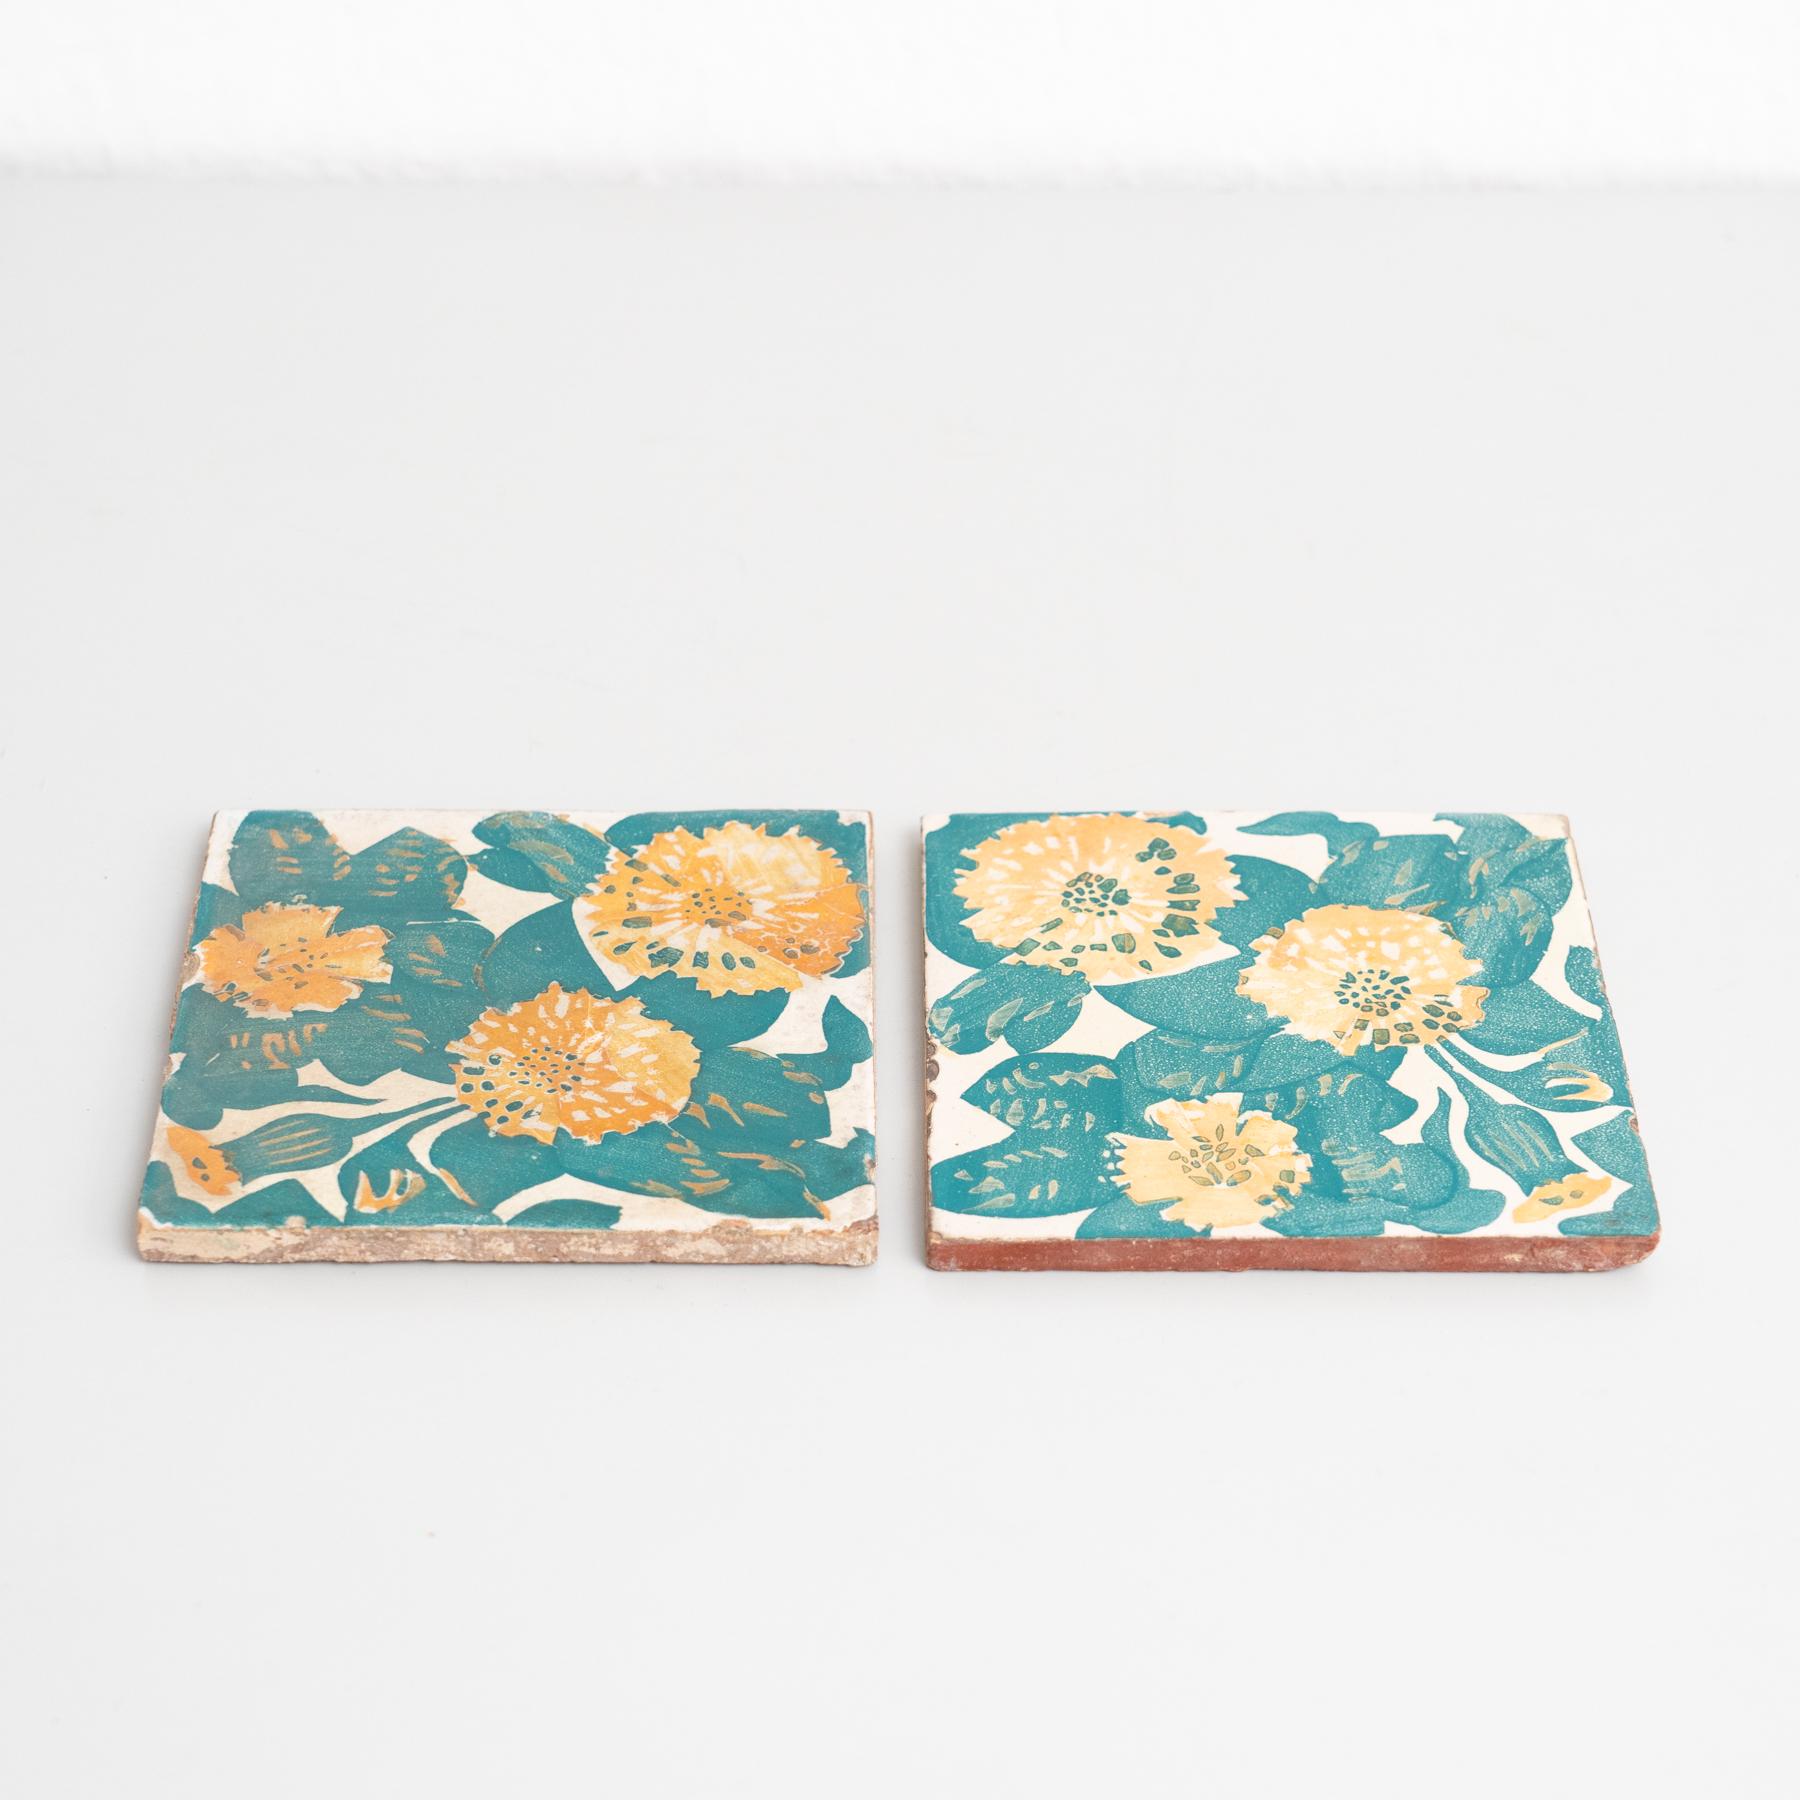 Decorative ceramic tiles by Antoni Gaudi, inspired by the marigold and dianthus motifs on the decorative ceramic tiles he designed for the facade of Casa Vicens, which constitute some of its most iconic features.

In good original condition, with